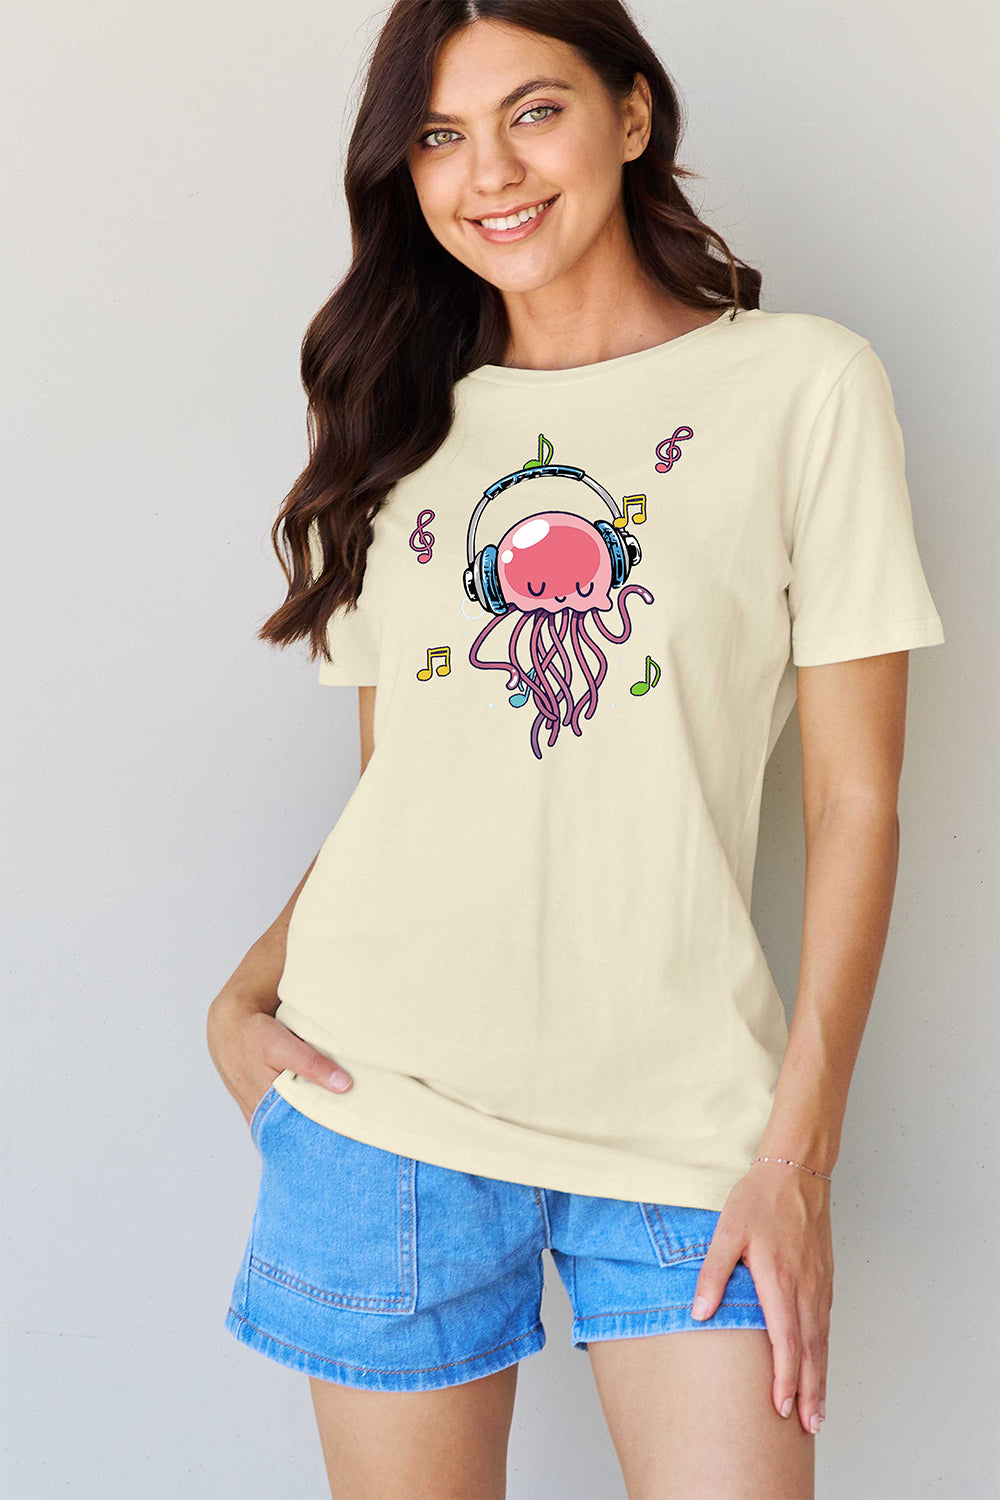 Simply Love Full Size Octopus Graphic Cotton T-Shirt